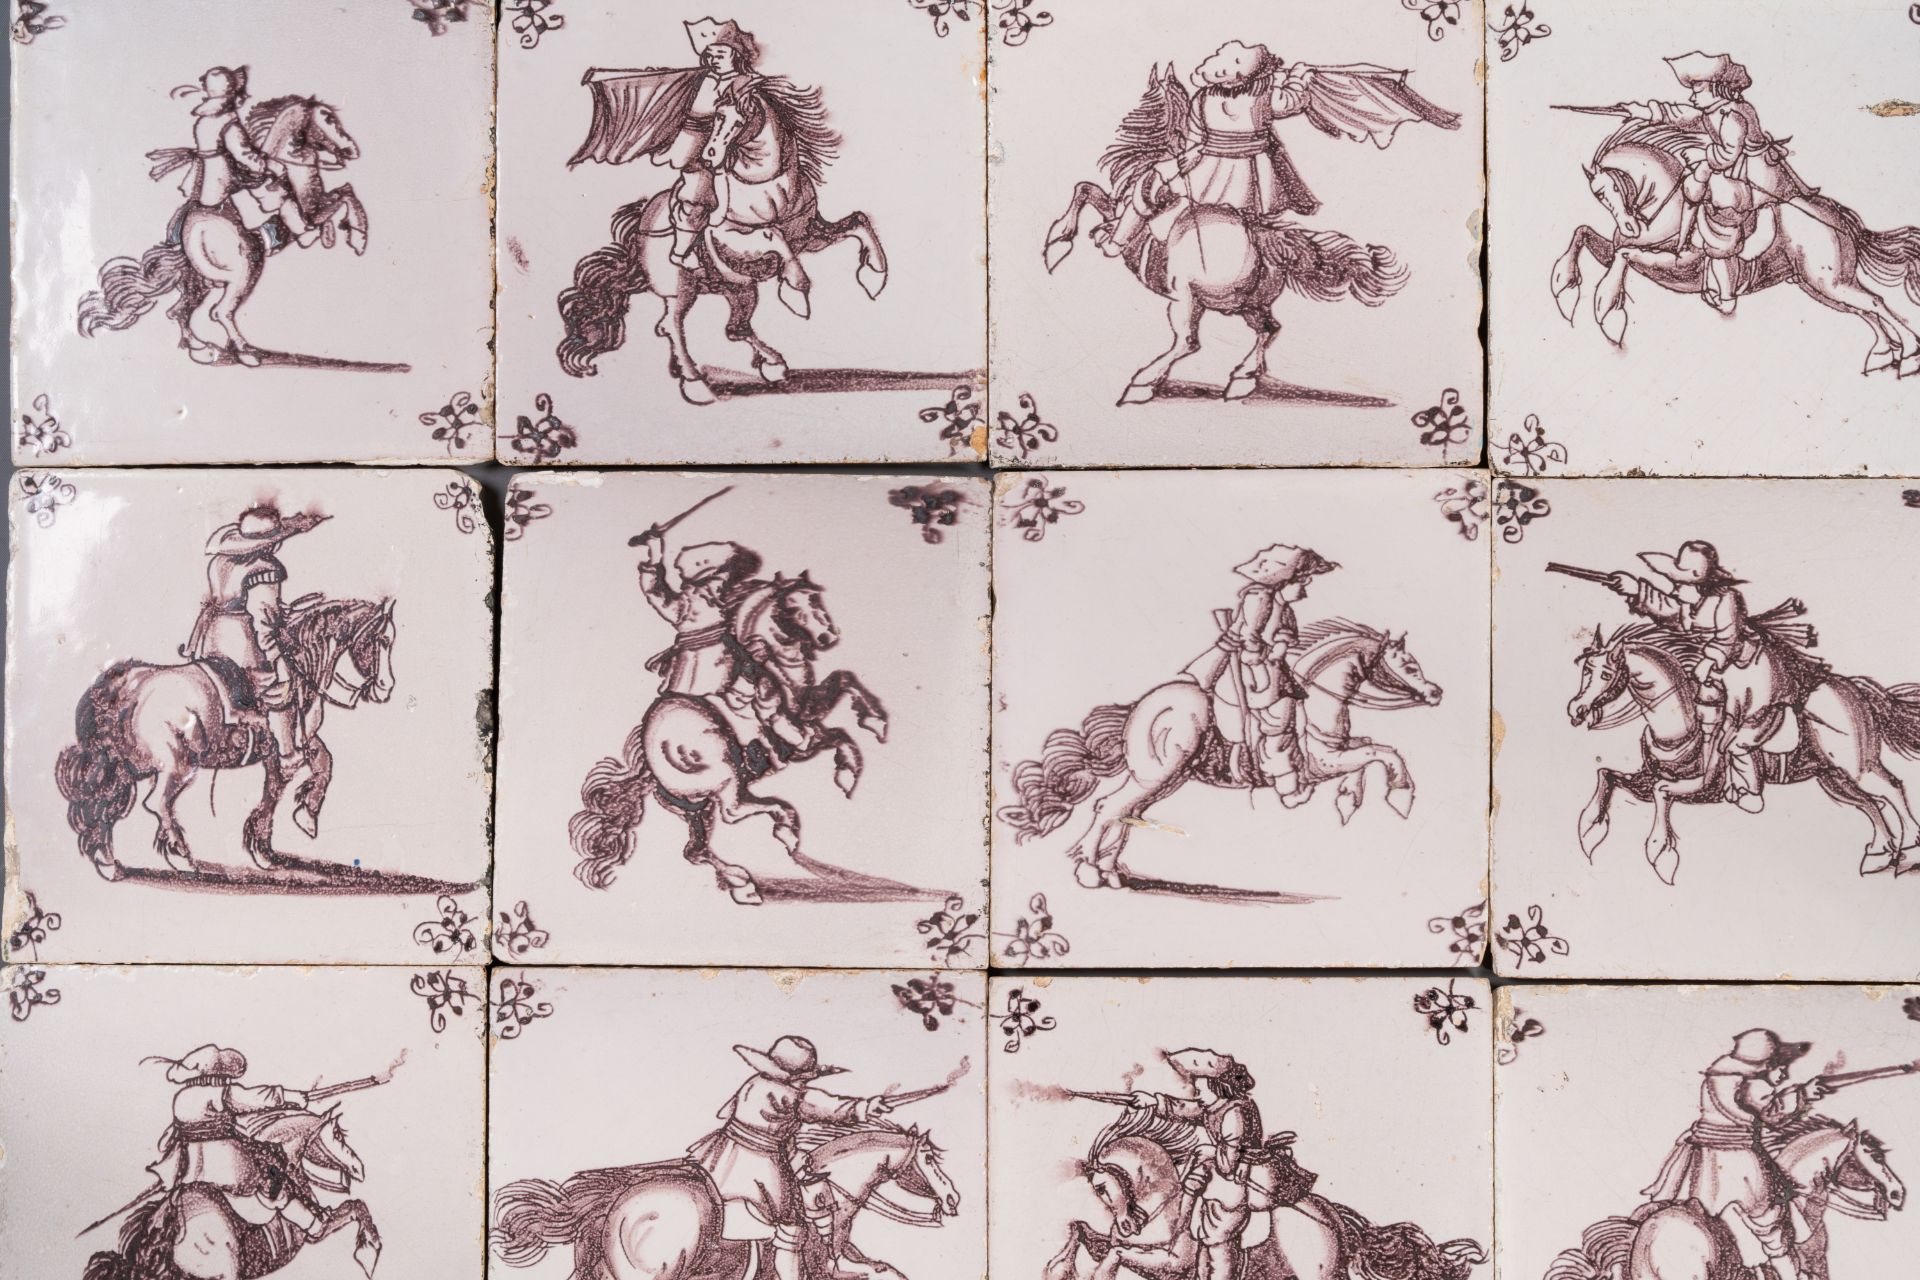 Fifteen Dutch Delft manganese tiles with horse riders, late 17th C. - Image 3 of 13